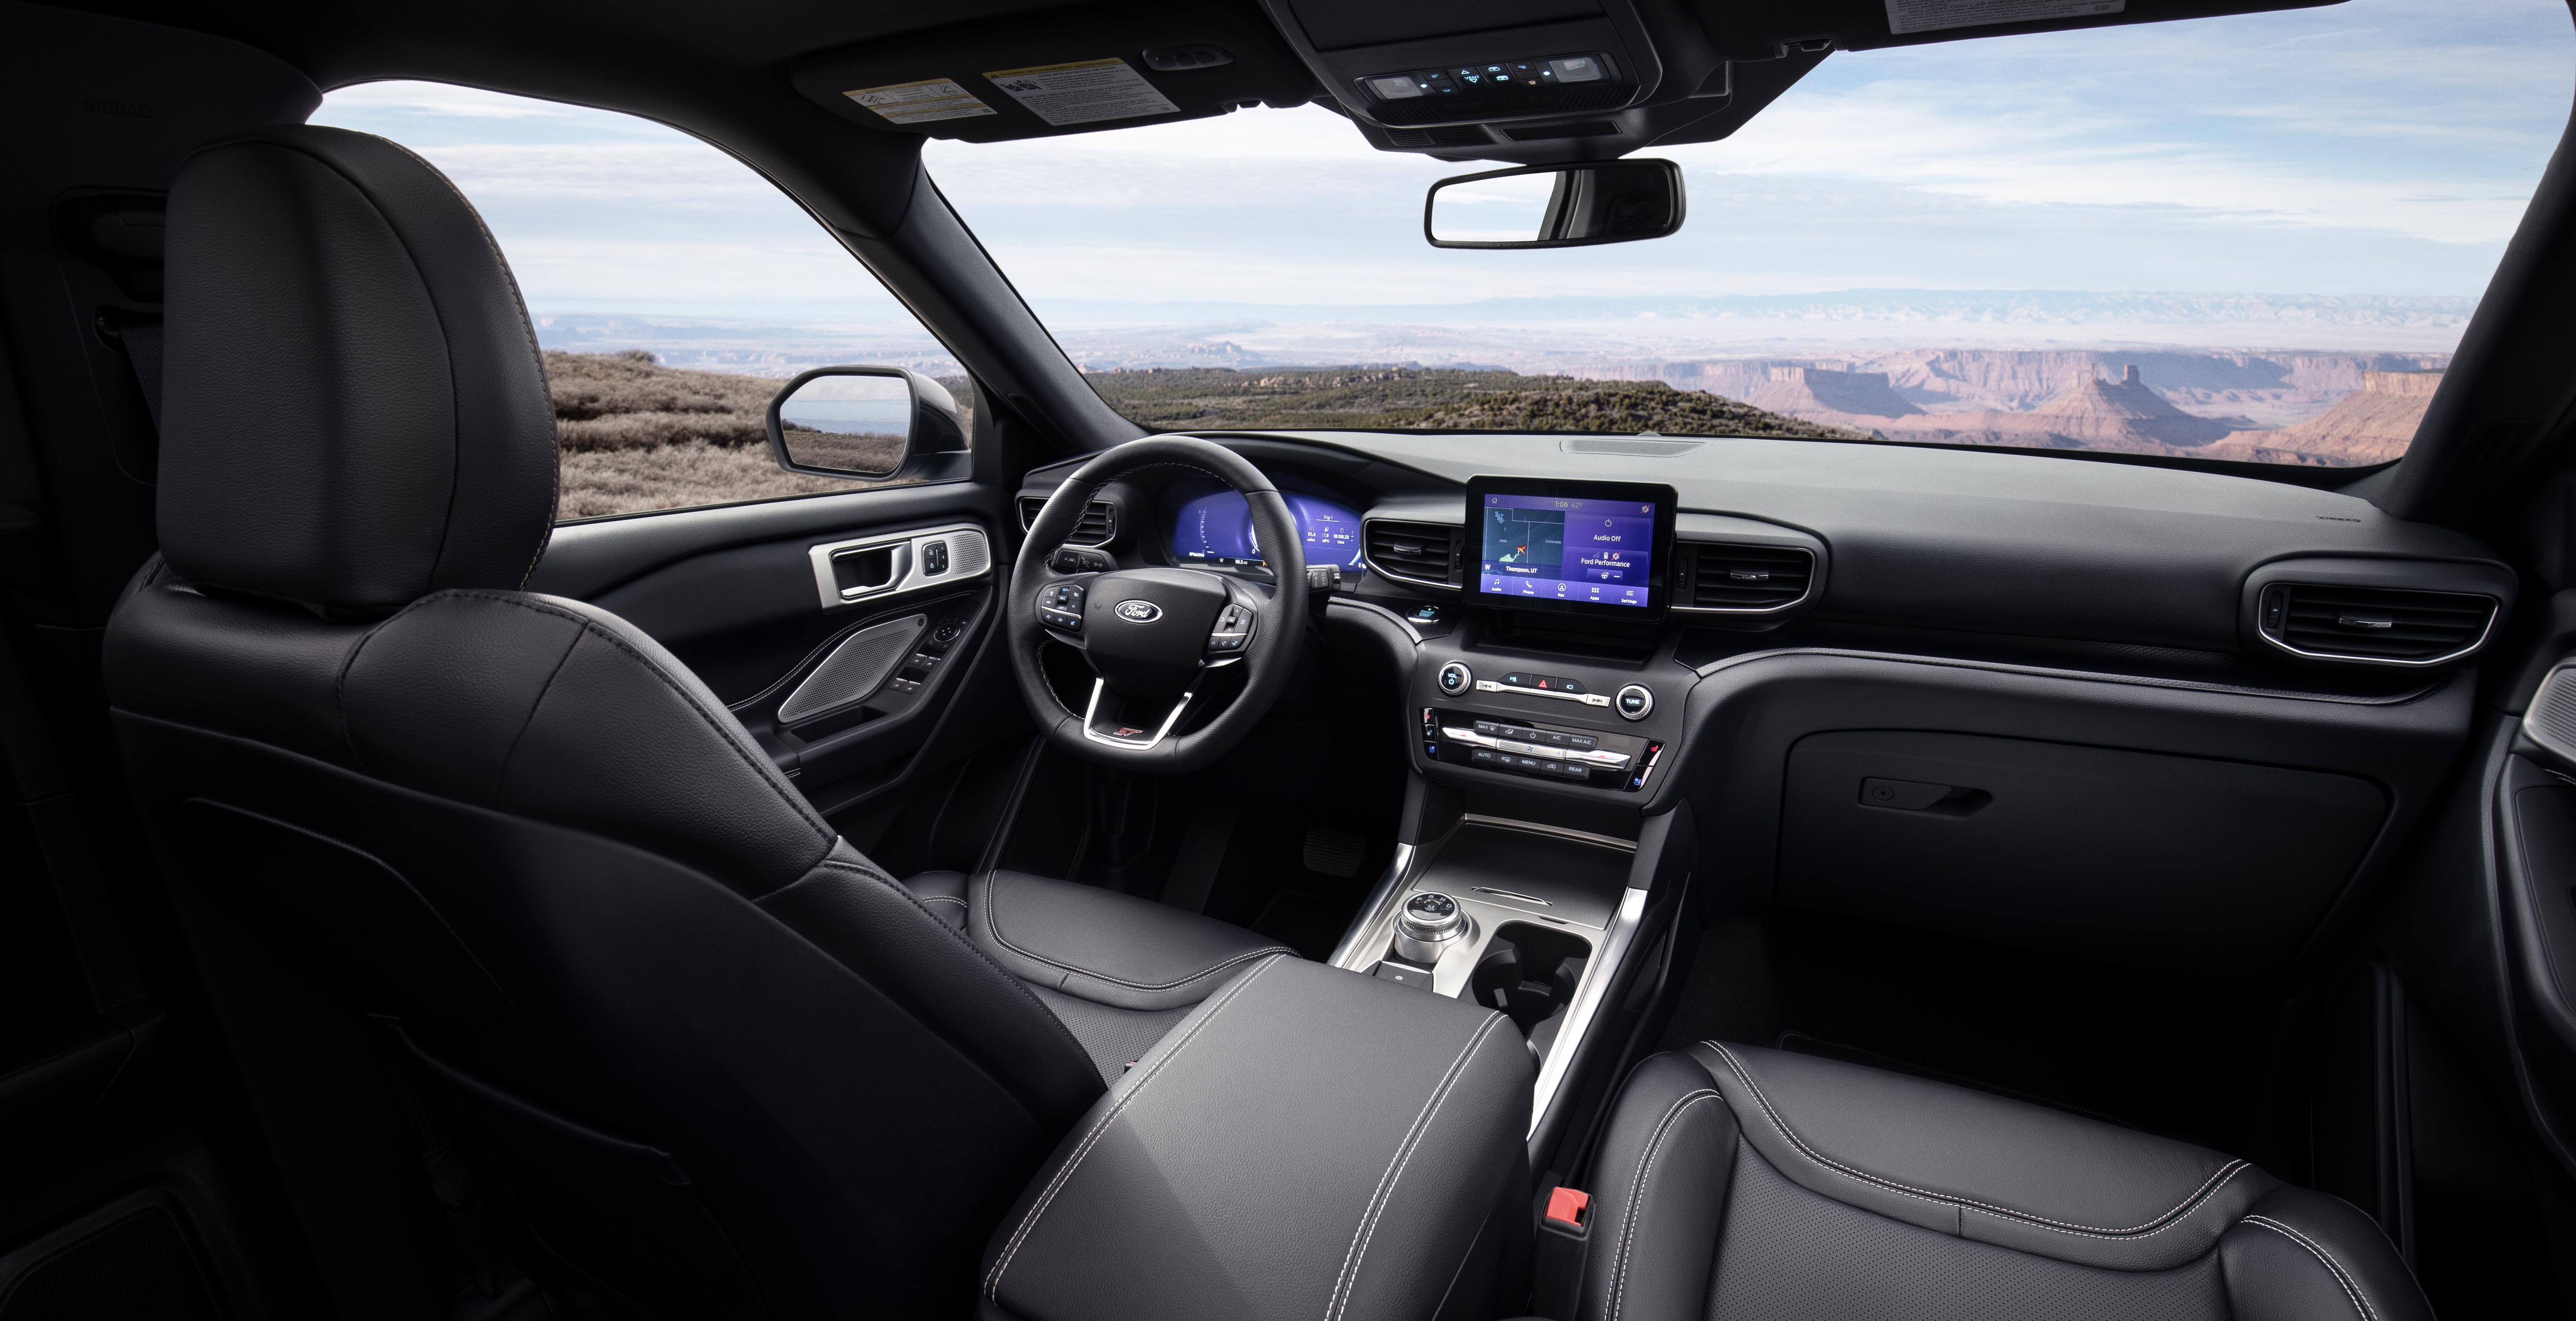 [Photos] 2020 Ford Explorer Gets Powerful Engines, Lots of Tech, Plenty